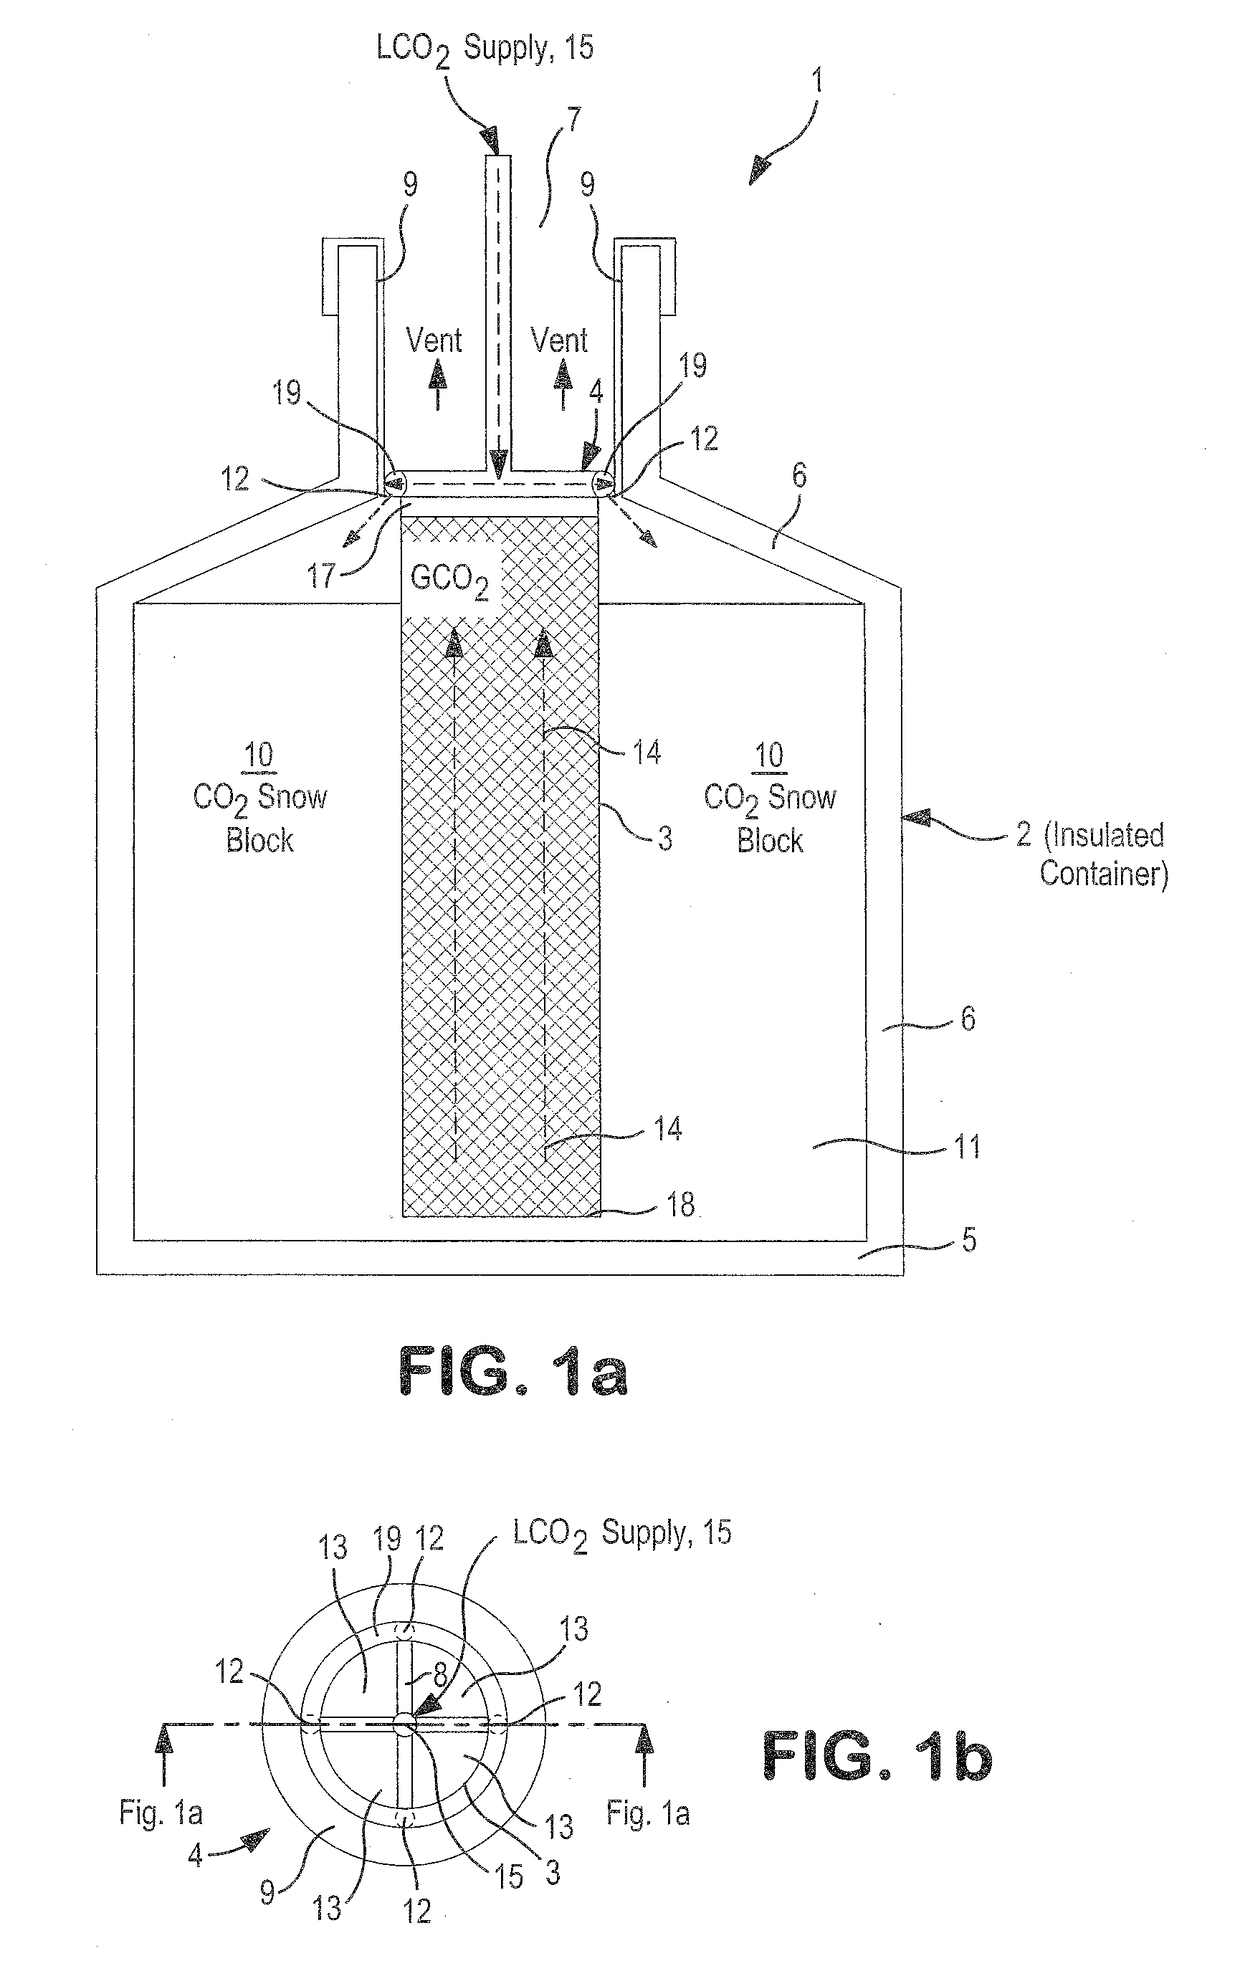 Transportable container, charger system, method and kit for generation of carbon dioxide snow block in-situ within the transportable container for preservation of items stored therewithin